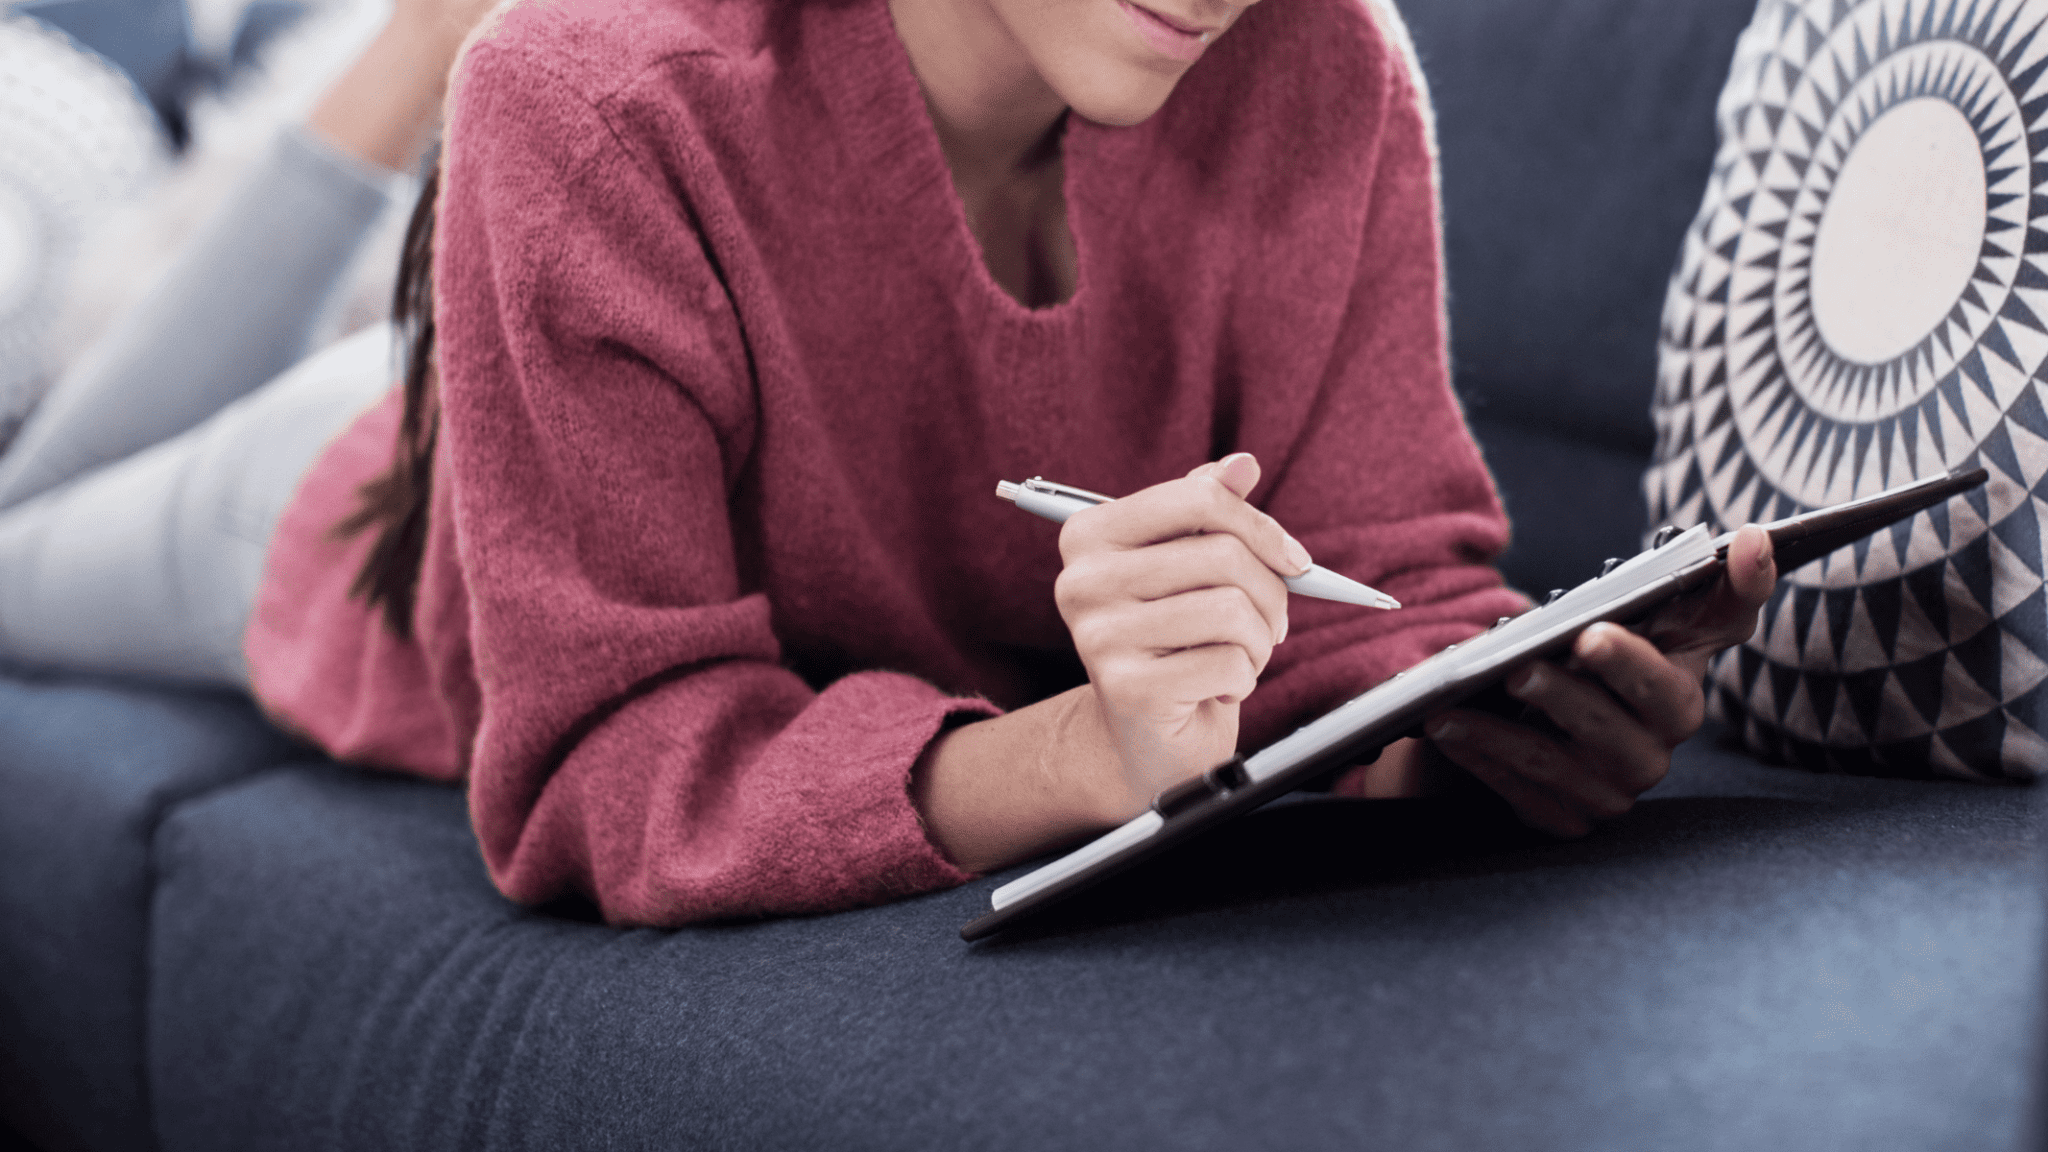 Woman in burgundy sweater on her stomach on a gray couch writing in a gratitude journal